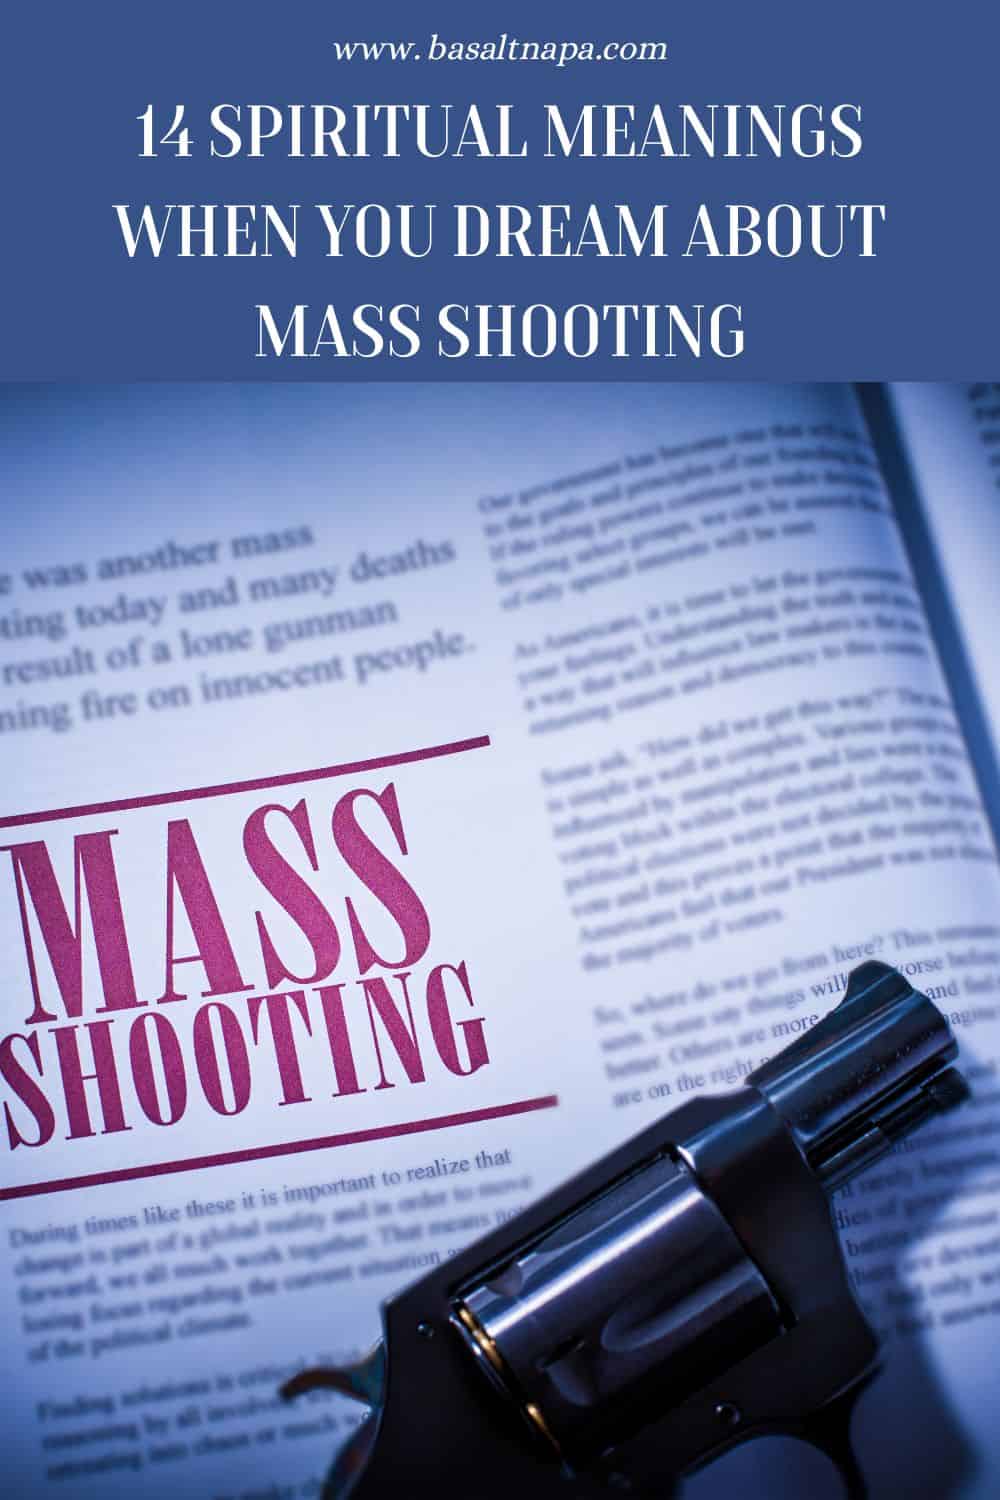 14 Spiritual Meanings When You Dream About Mass Shooting